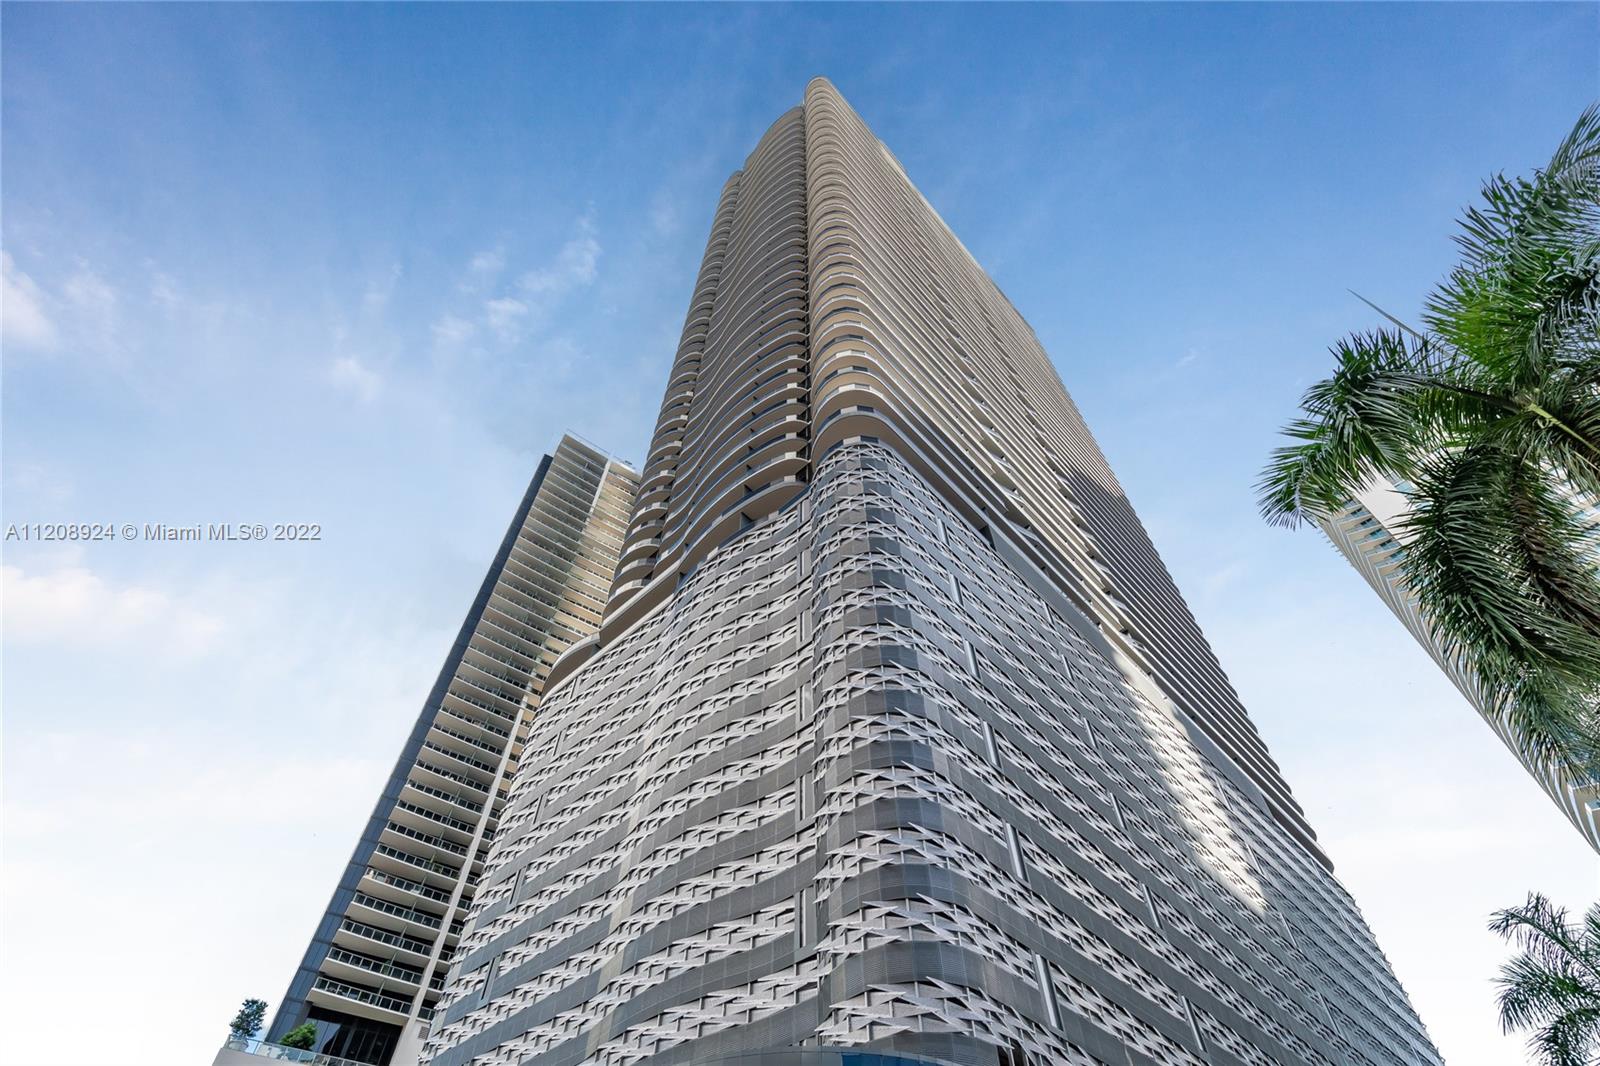 AMAZING OPPORTUNITY. Skyline views from this corner unit at Brickell Flatiron. 3 beds/3.5 baths with 1,912 SF AC Area plus 601 Terrace. Two assigned parking spaces plus one free valet. Top of the line Miele Appliances, Snaidero Kitchens & Baths w/ Dornbracht faucets, Italian doors and expansive wrap around balconies. Designed to perfection this unit is move in ready. Sky club on the 64th floor features full service spa, sauna/steam rooms, fully loaded fitness center, pool + jacuzzi w 360 degree views of Miami & jaw dropping sunsets, day beds & lounging areas, theatre, game room, lap pool, children play room & more. For info and general questions please contact us trough the email provided on MLS listing.  For showing instructions go through the showing MLS system